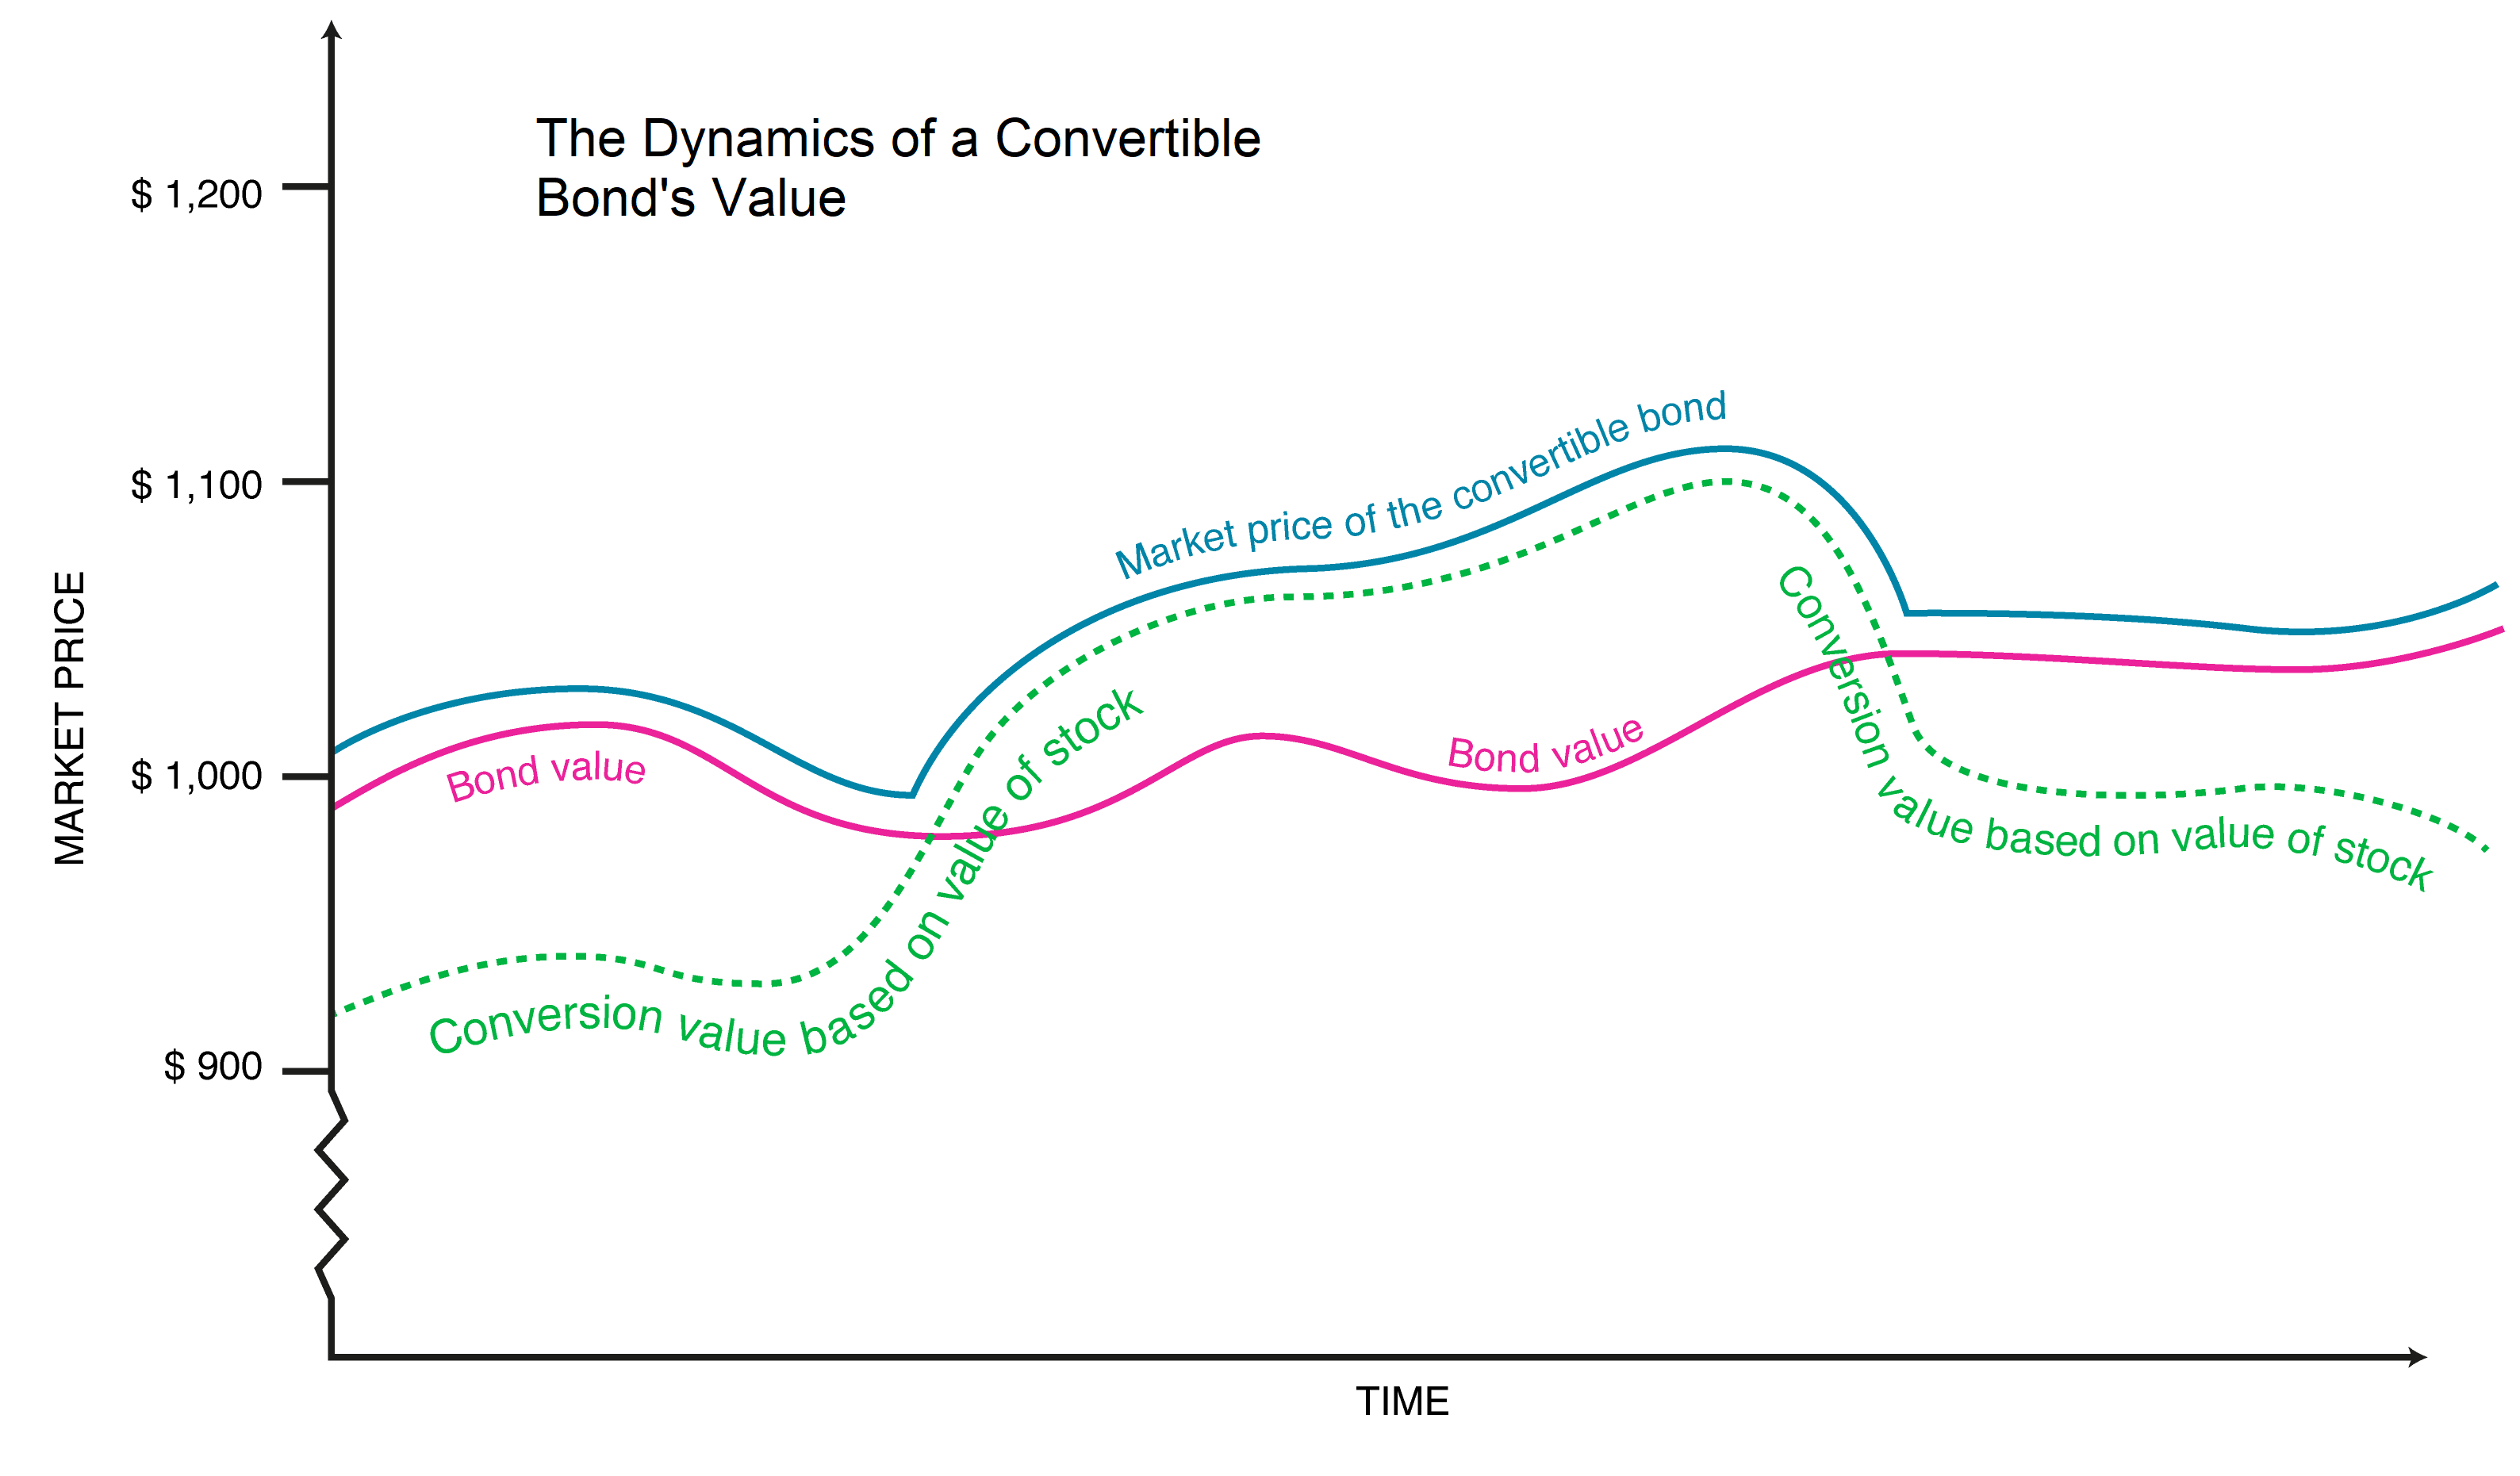 The dynamics of a convertible bond's valuation